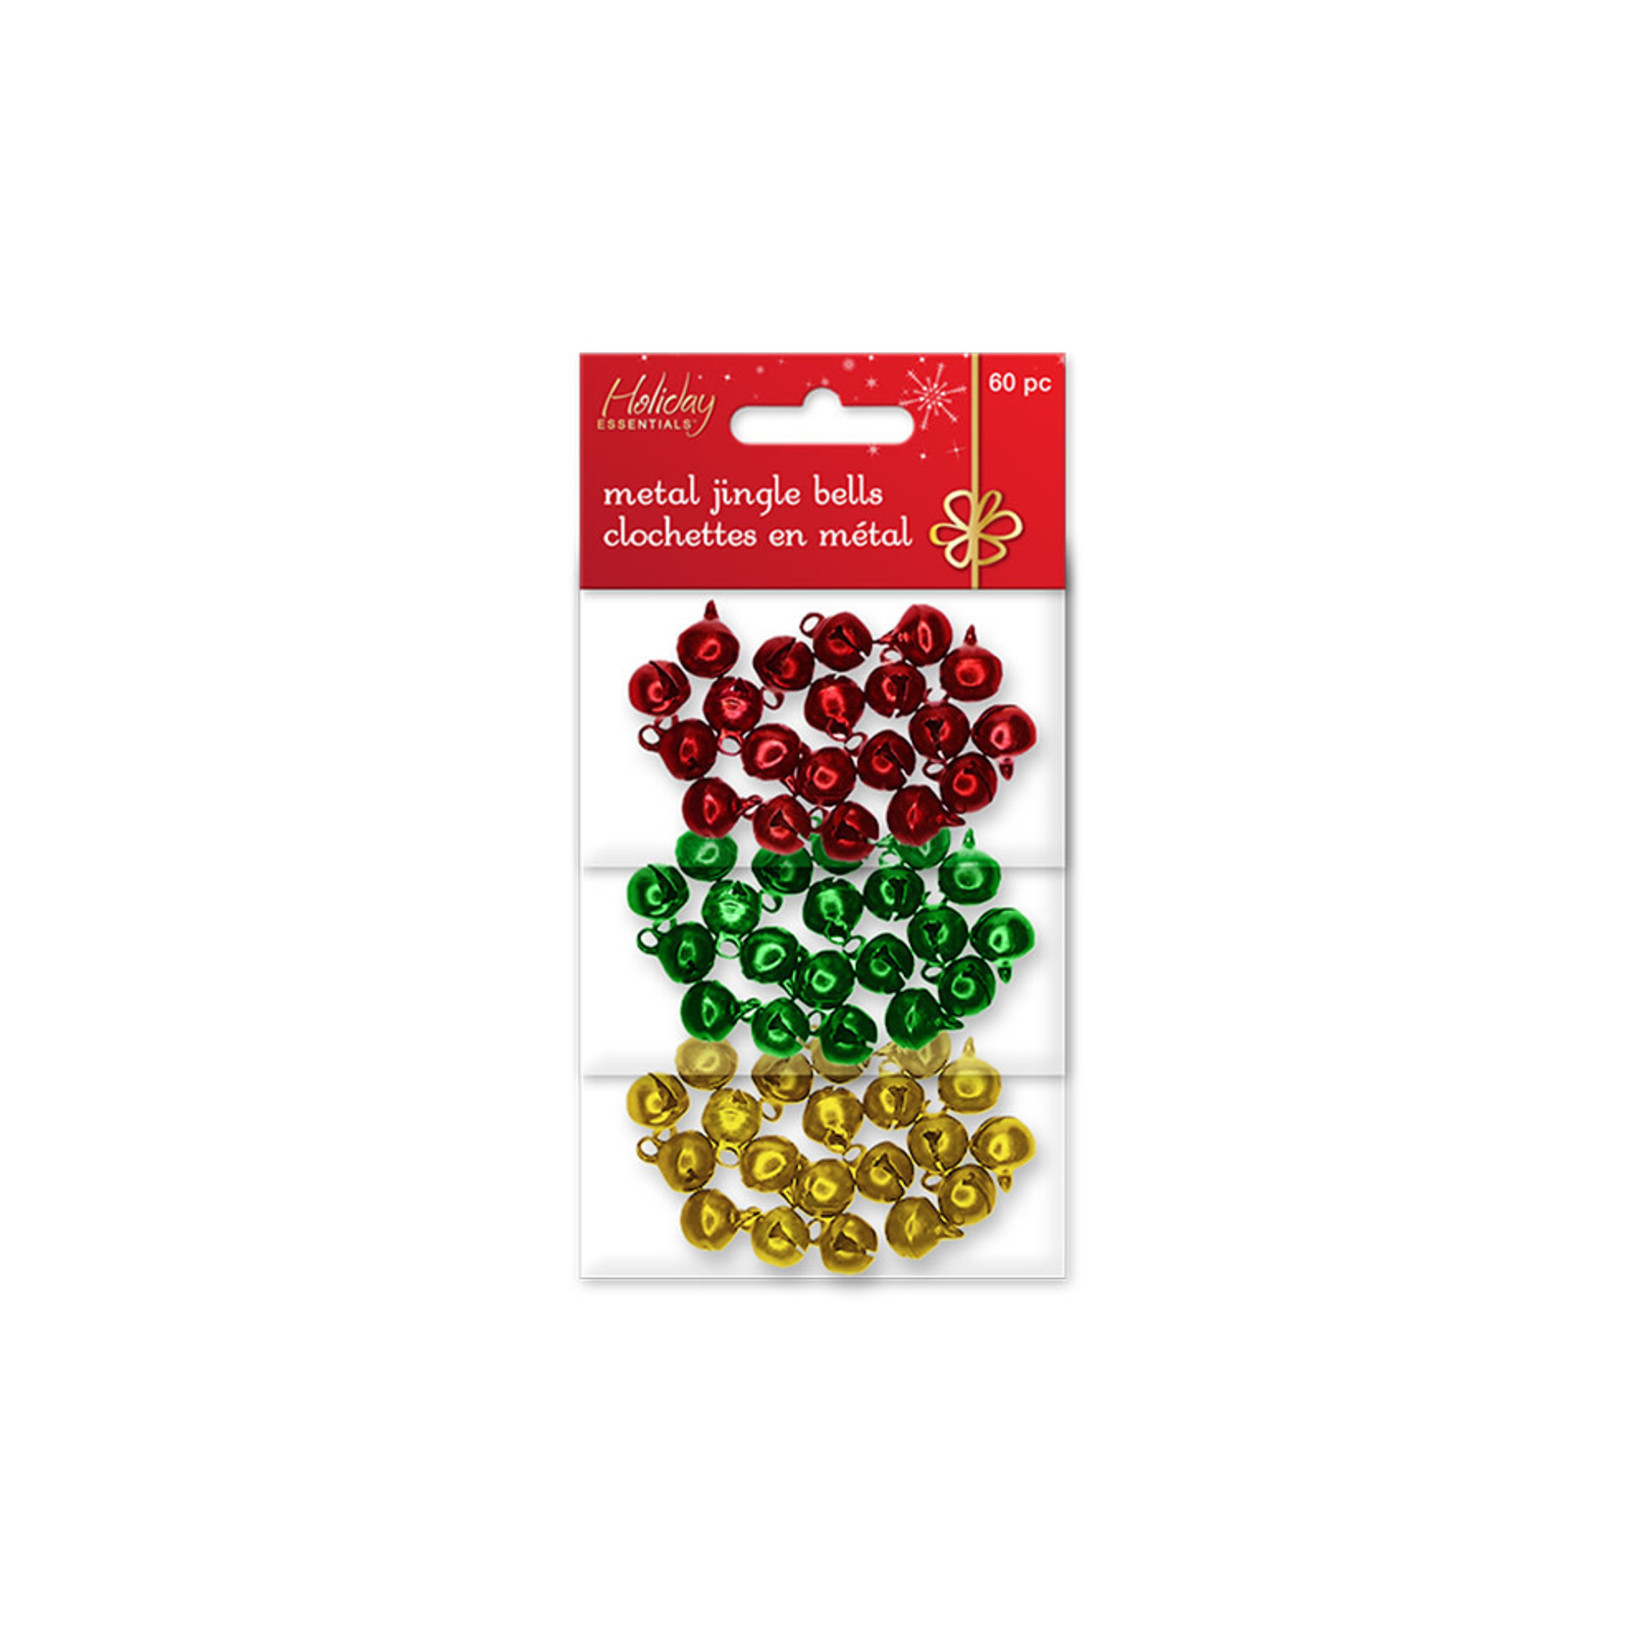 HOLIDAY CRAFT ESSENTIAL: 9MM FASHION JINGLE BELLS 60PC ASST 3 COLORS